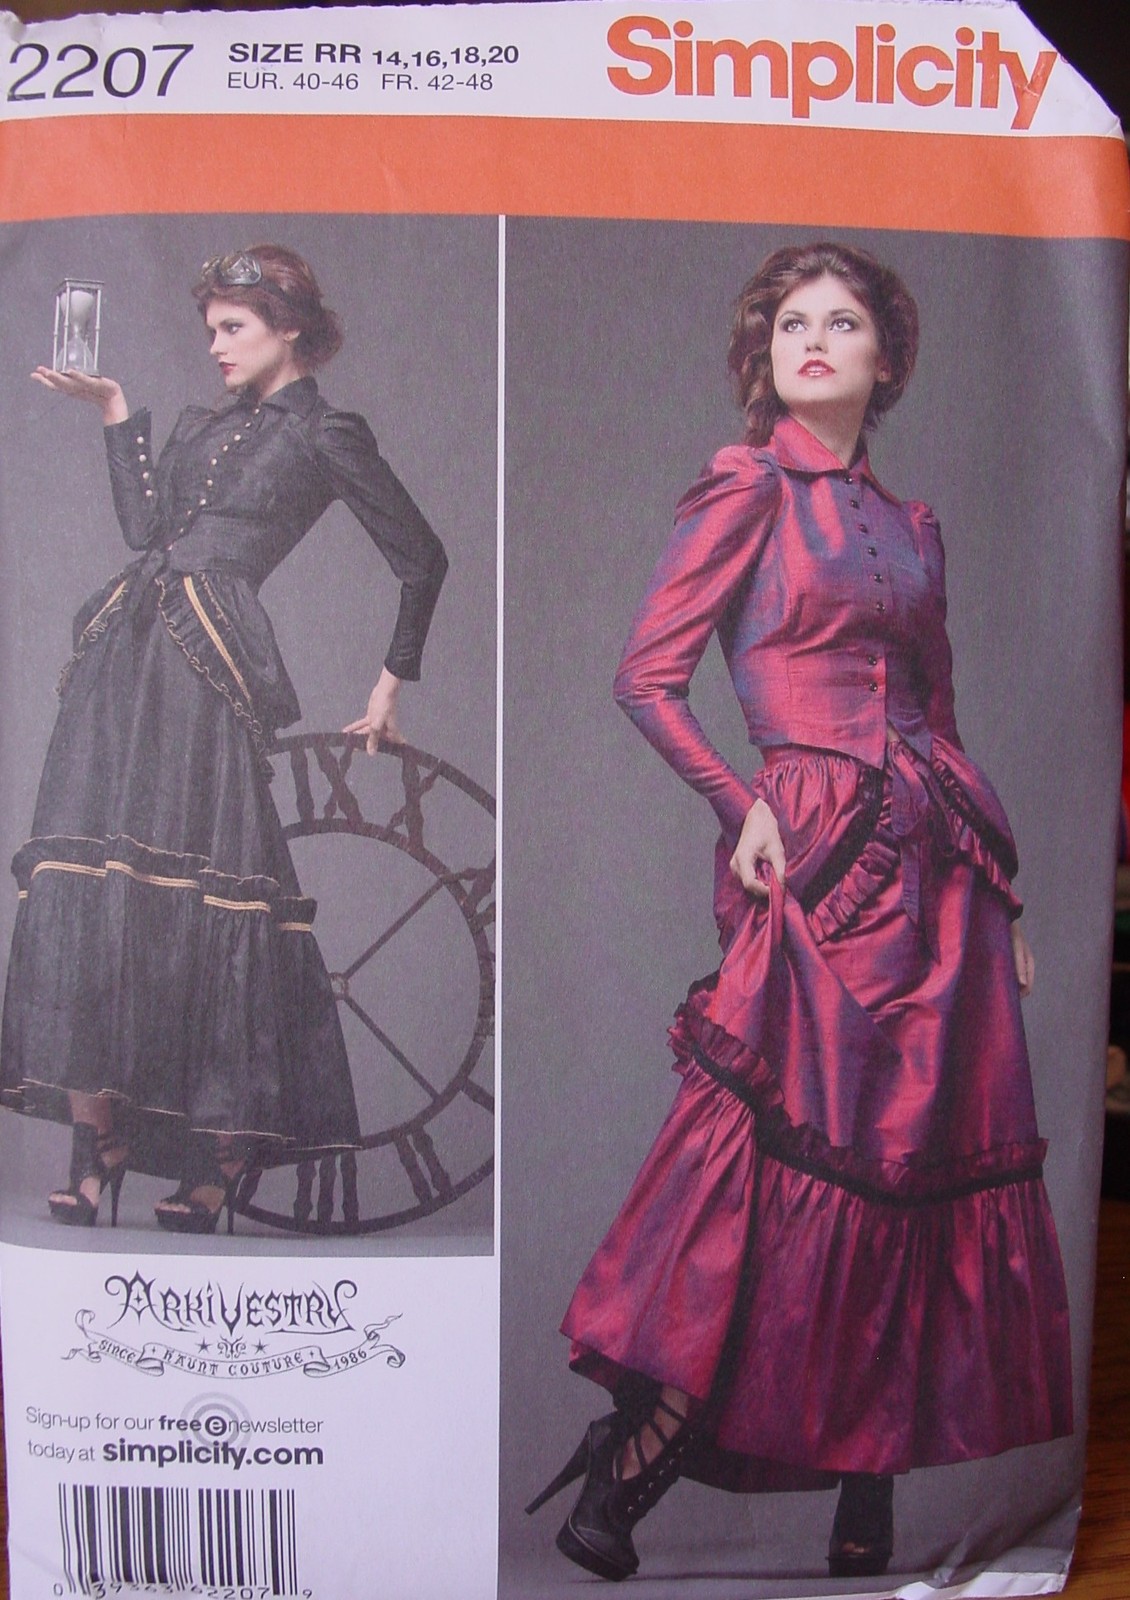 Sewing Pattern 2207 Steampunk, Victorian Misses sizes 14-22 UNCUT - $5.00